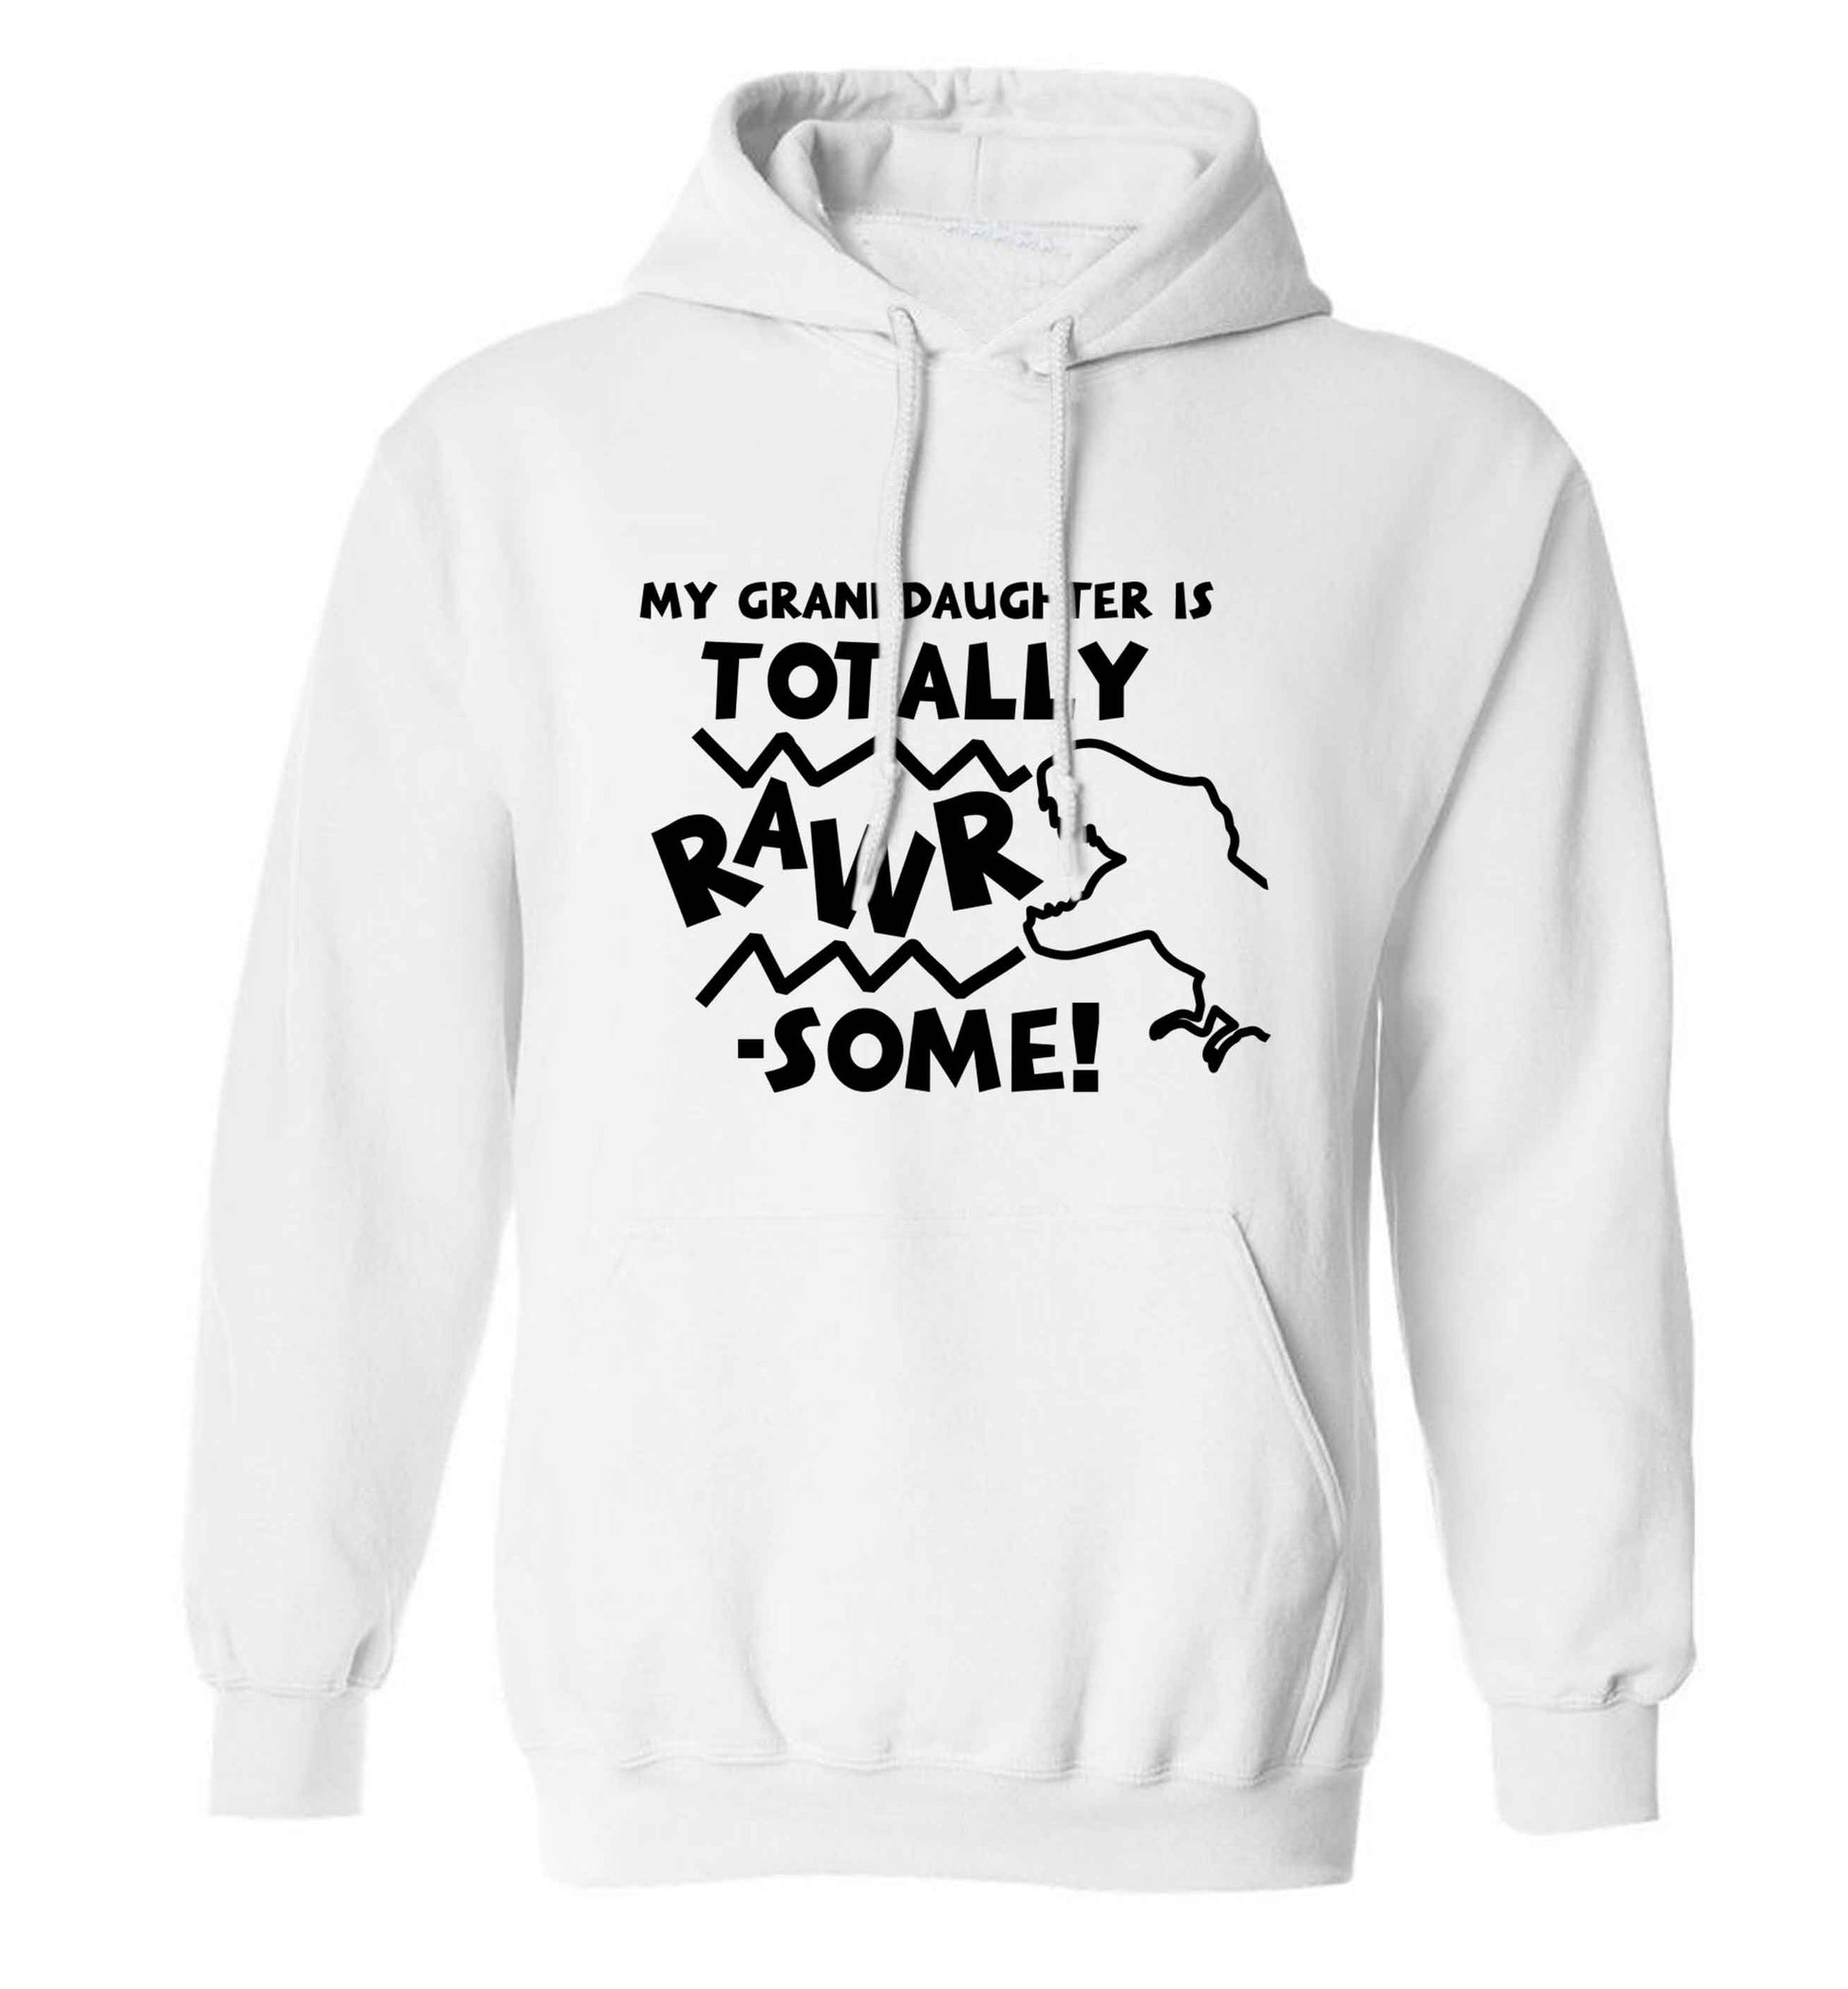 My granddaughter is totally rawrsome adults unisex white hoodie 2XL